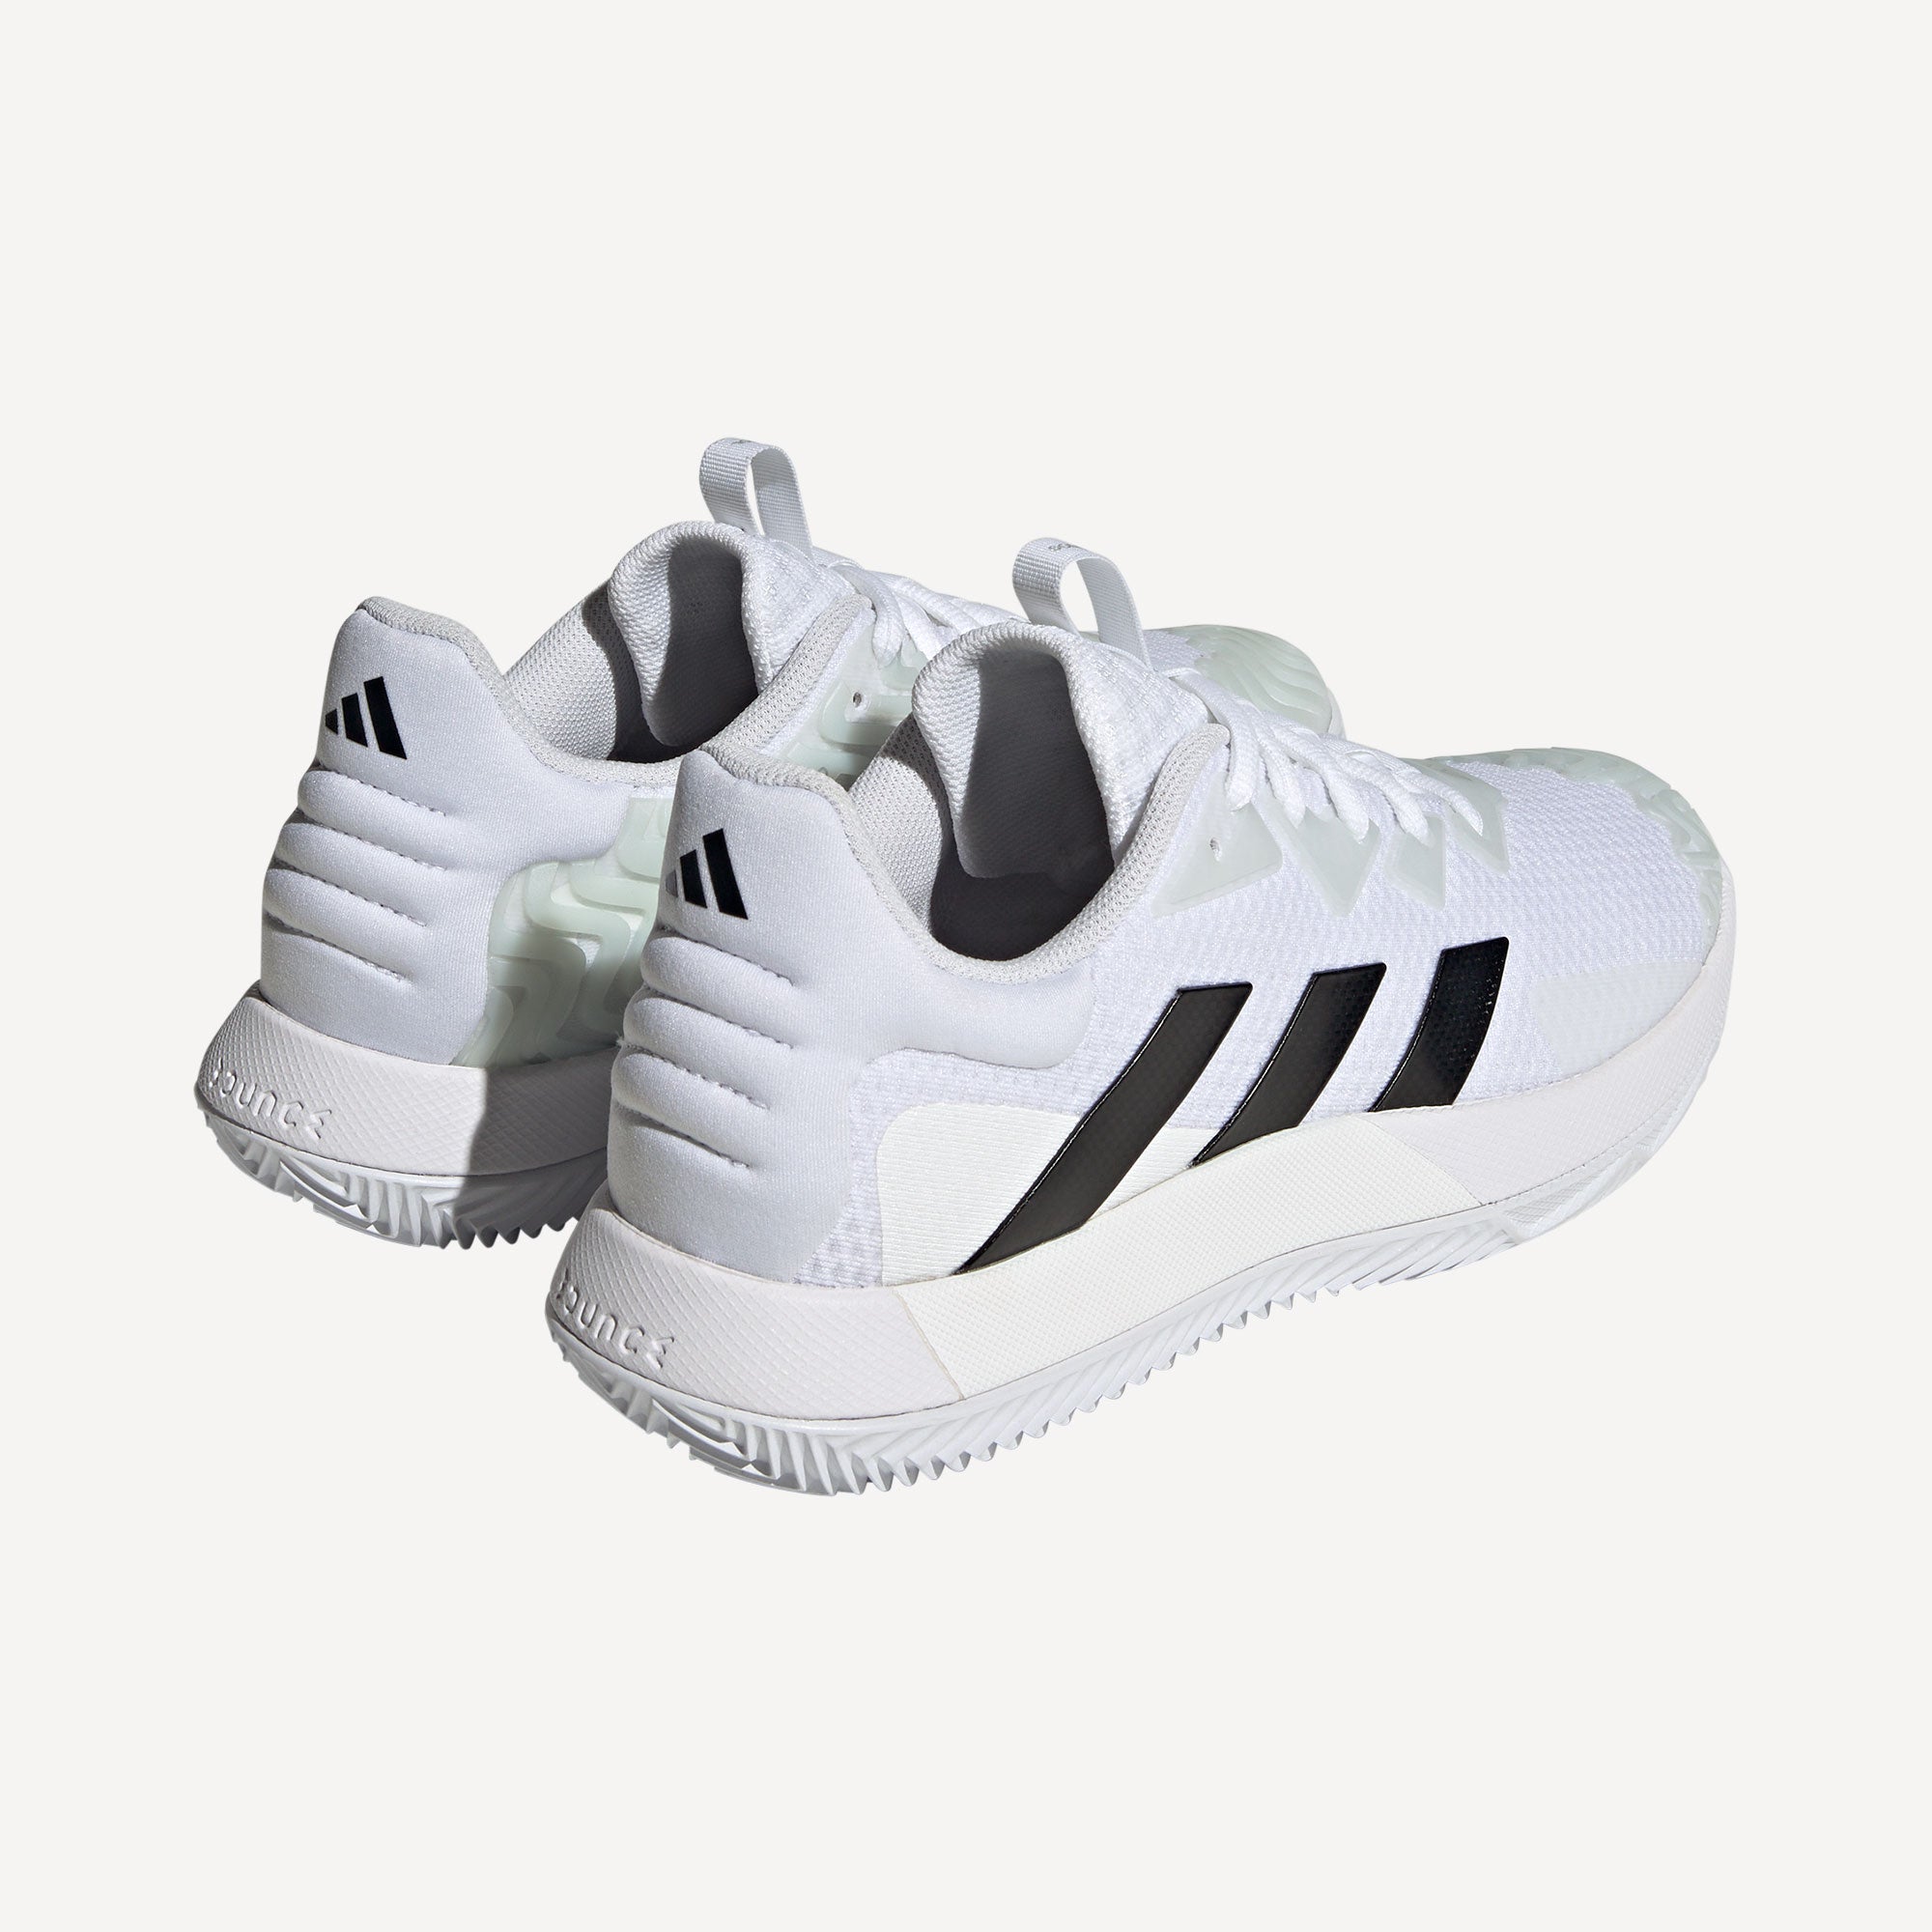 adidas SoleMatch Control Clay Men's Tennis Shoes - White (6)